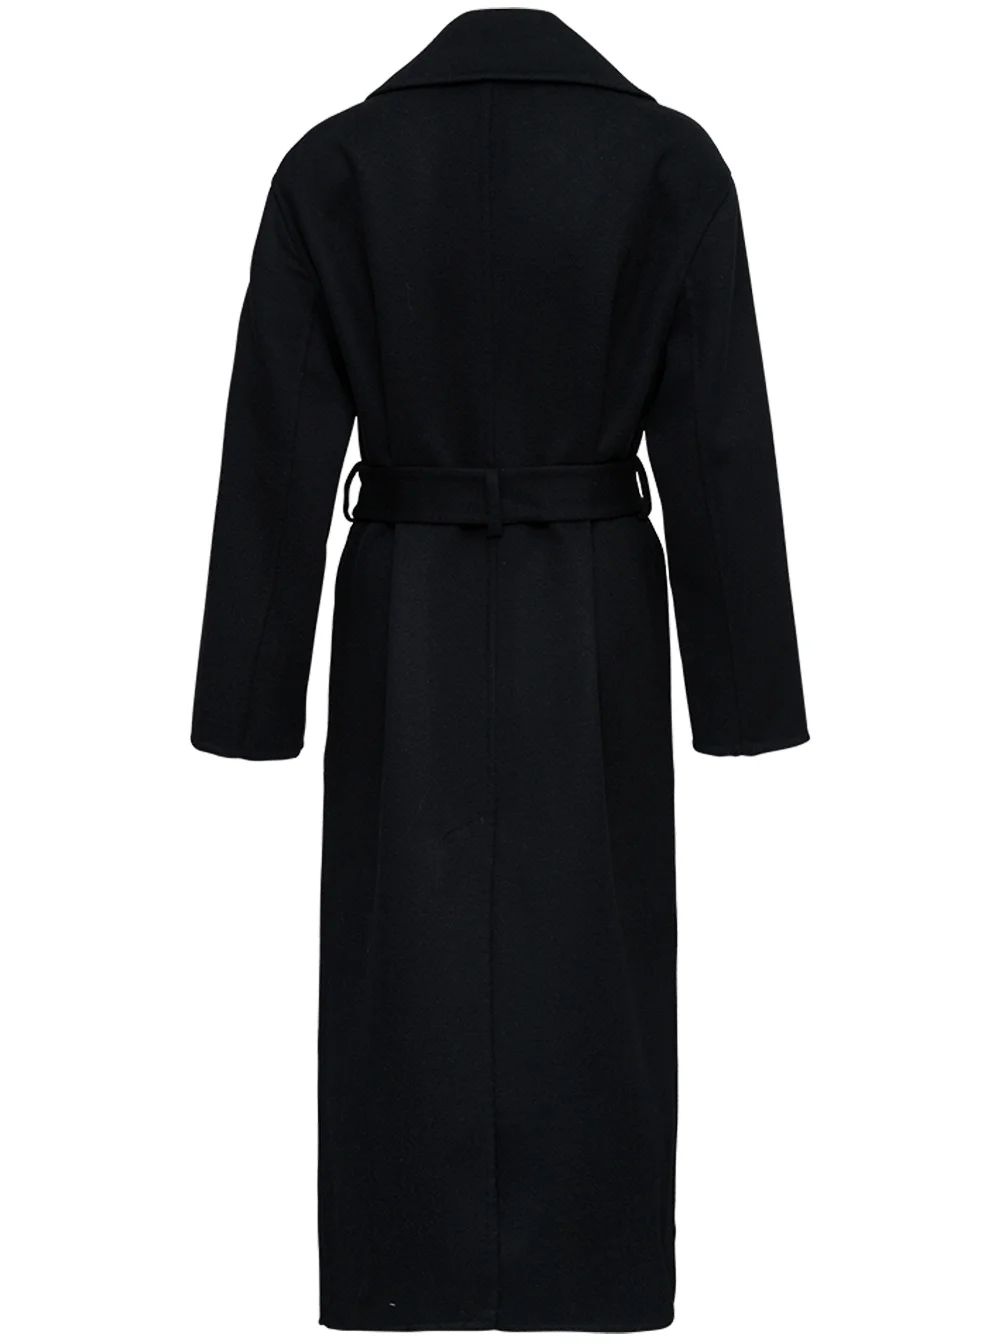 Michael Michael Kors Double-Breasted Tailored Coat | Cettire Global